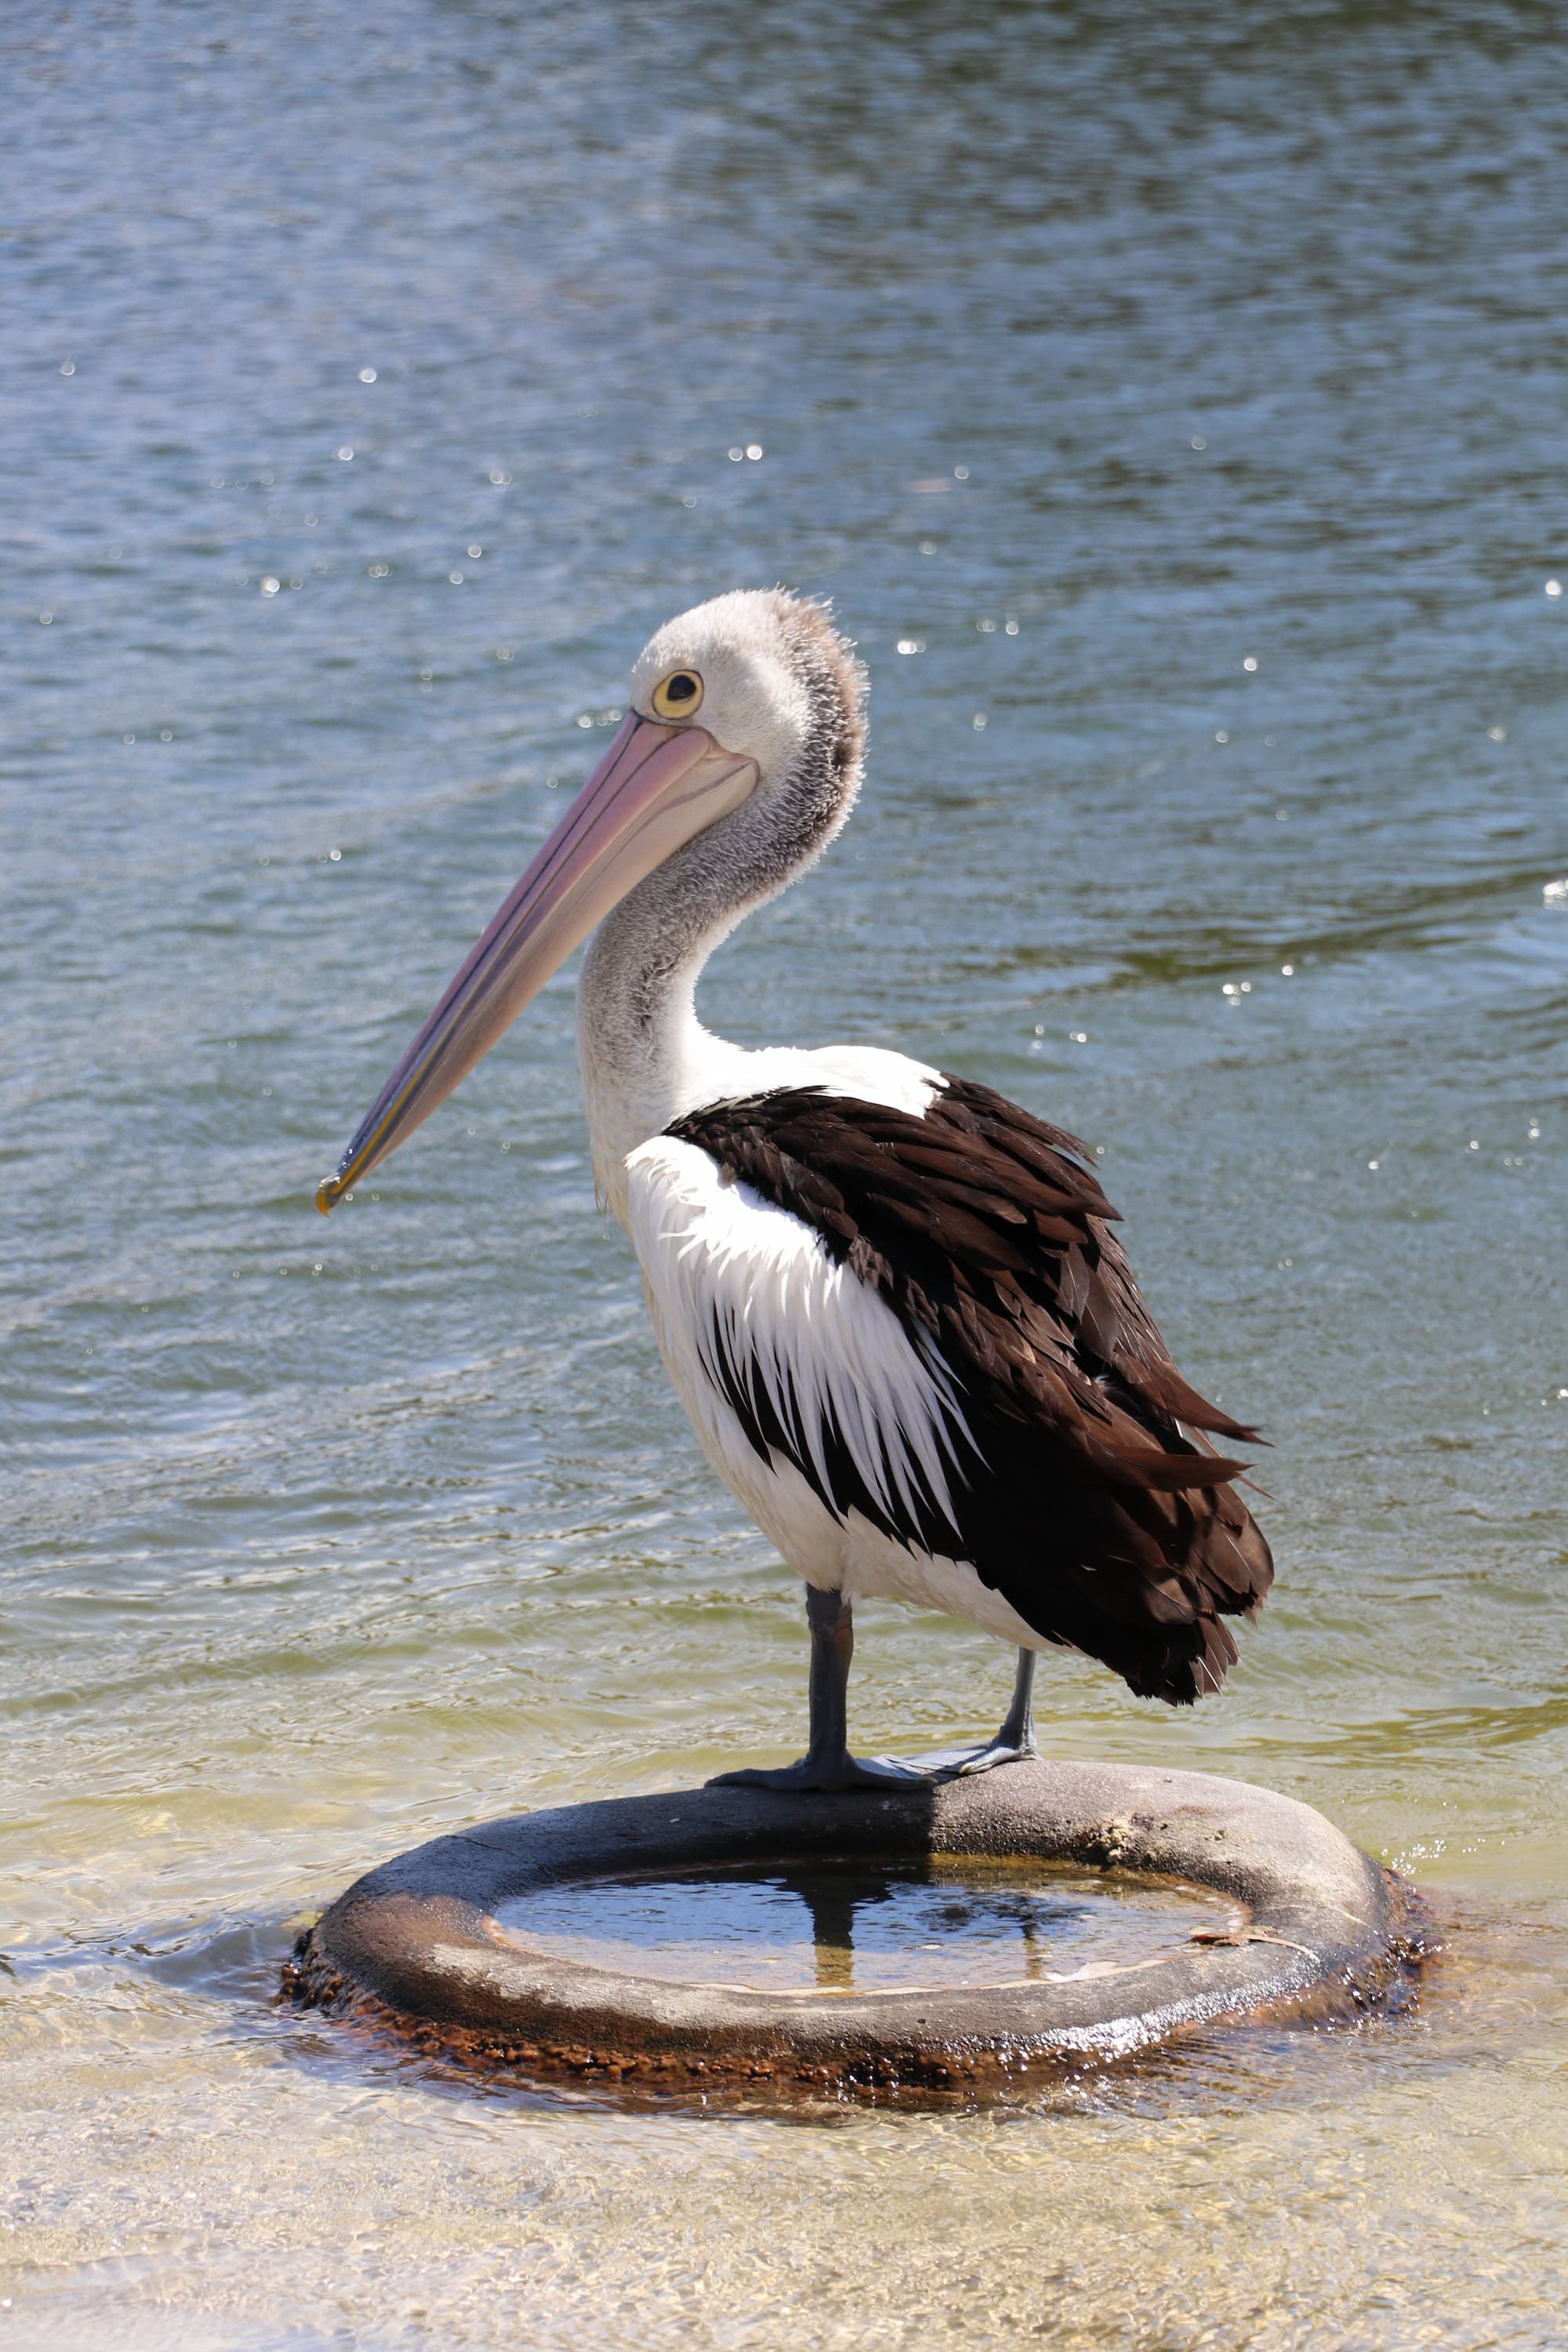 A pelican standing on the waters edge